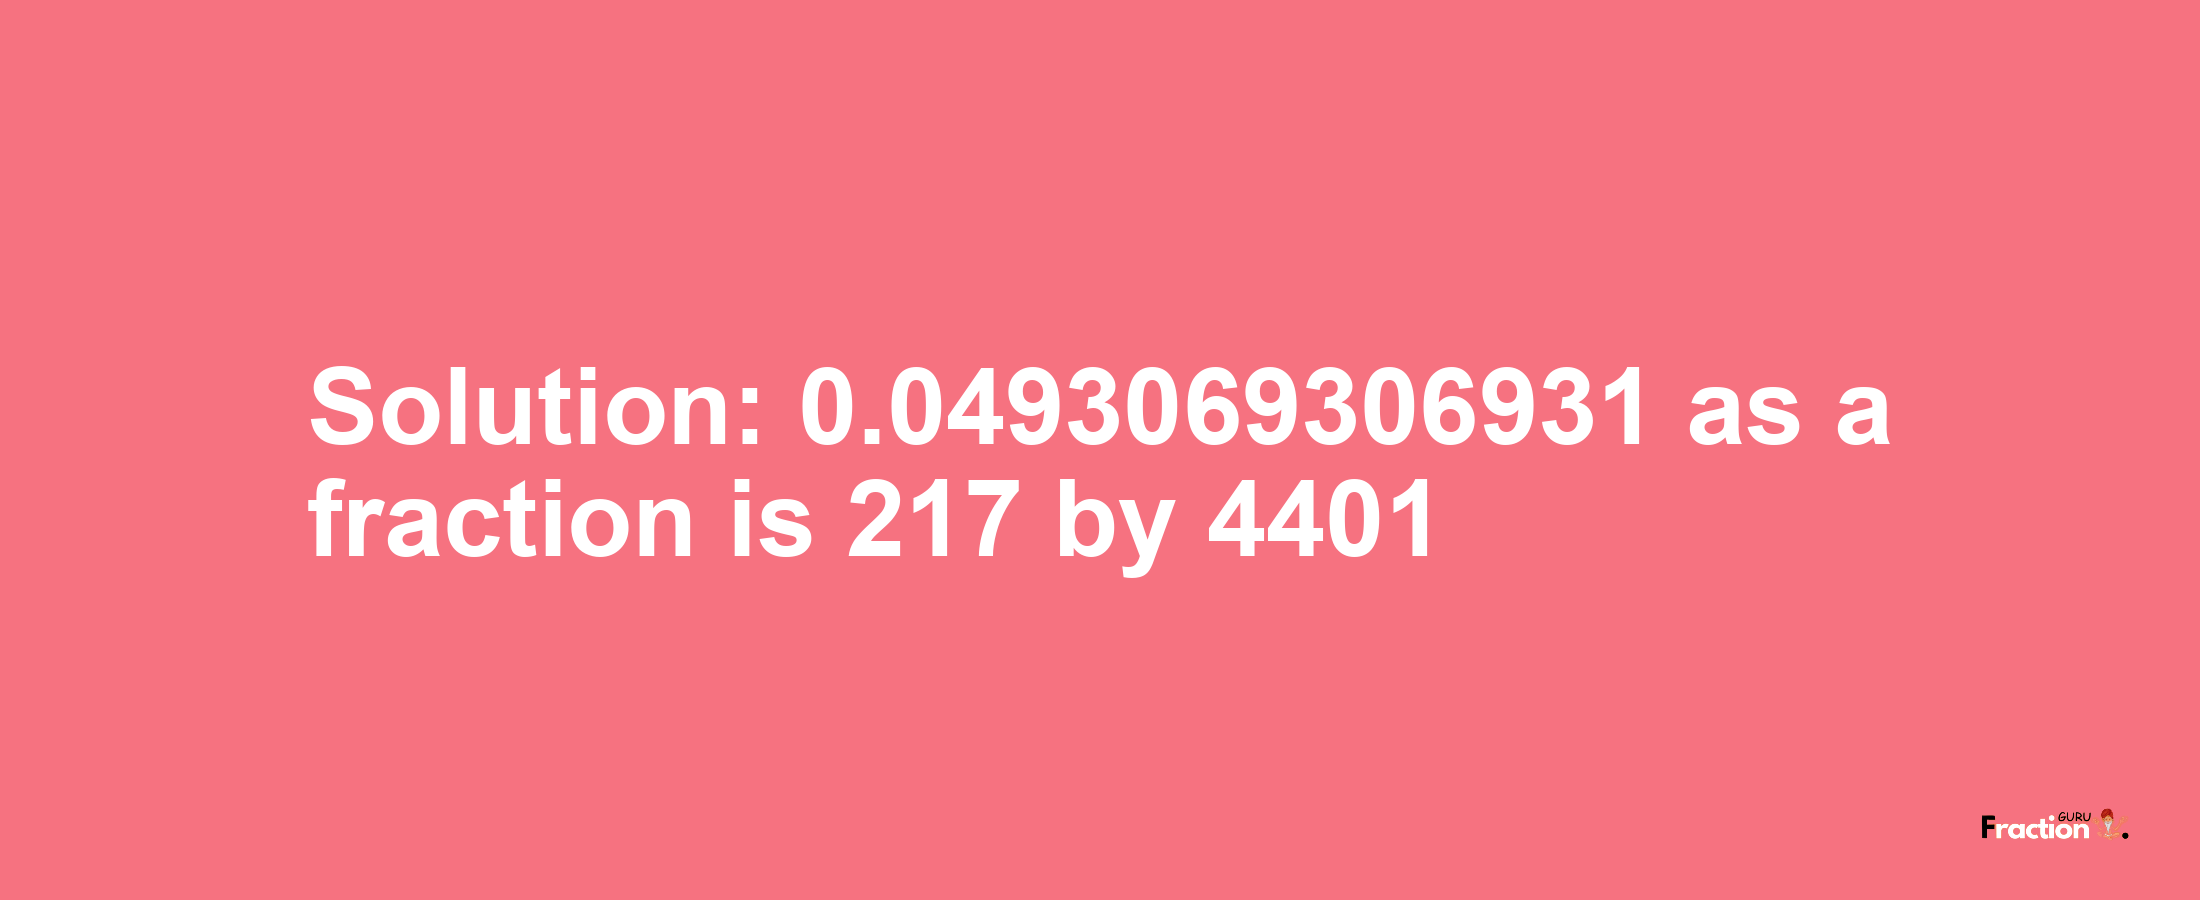 Solution:0.0493069306931 as a fraction is 217/4401